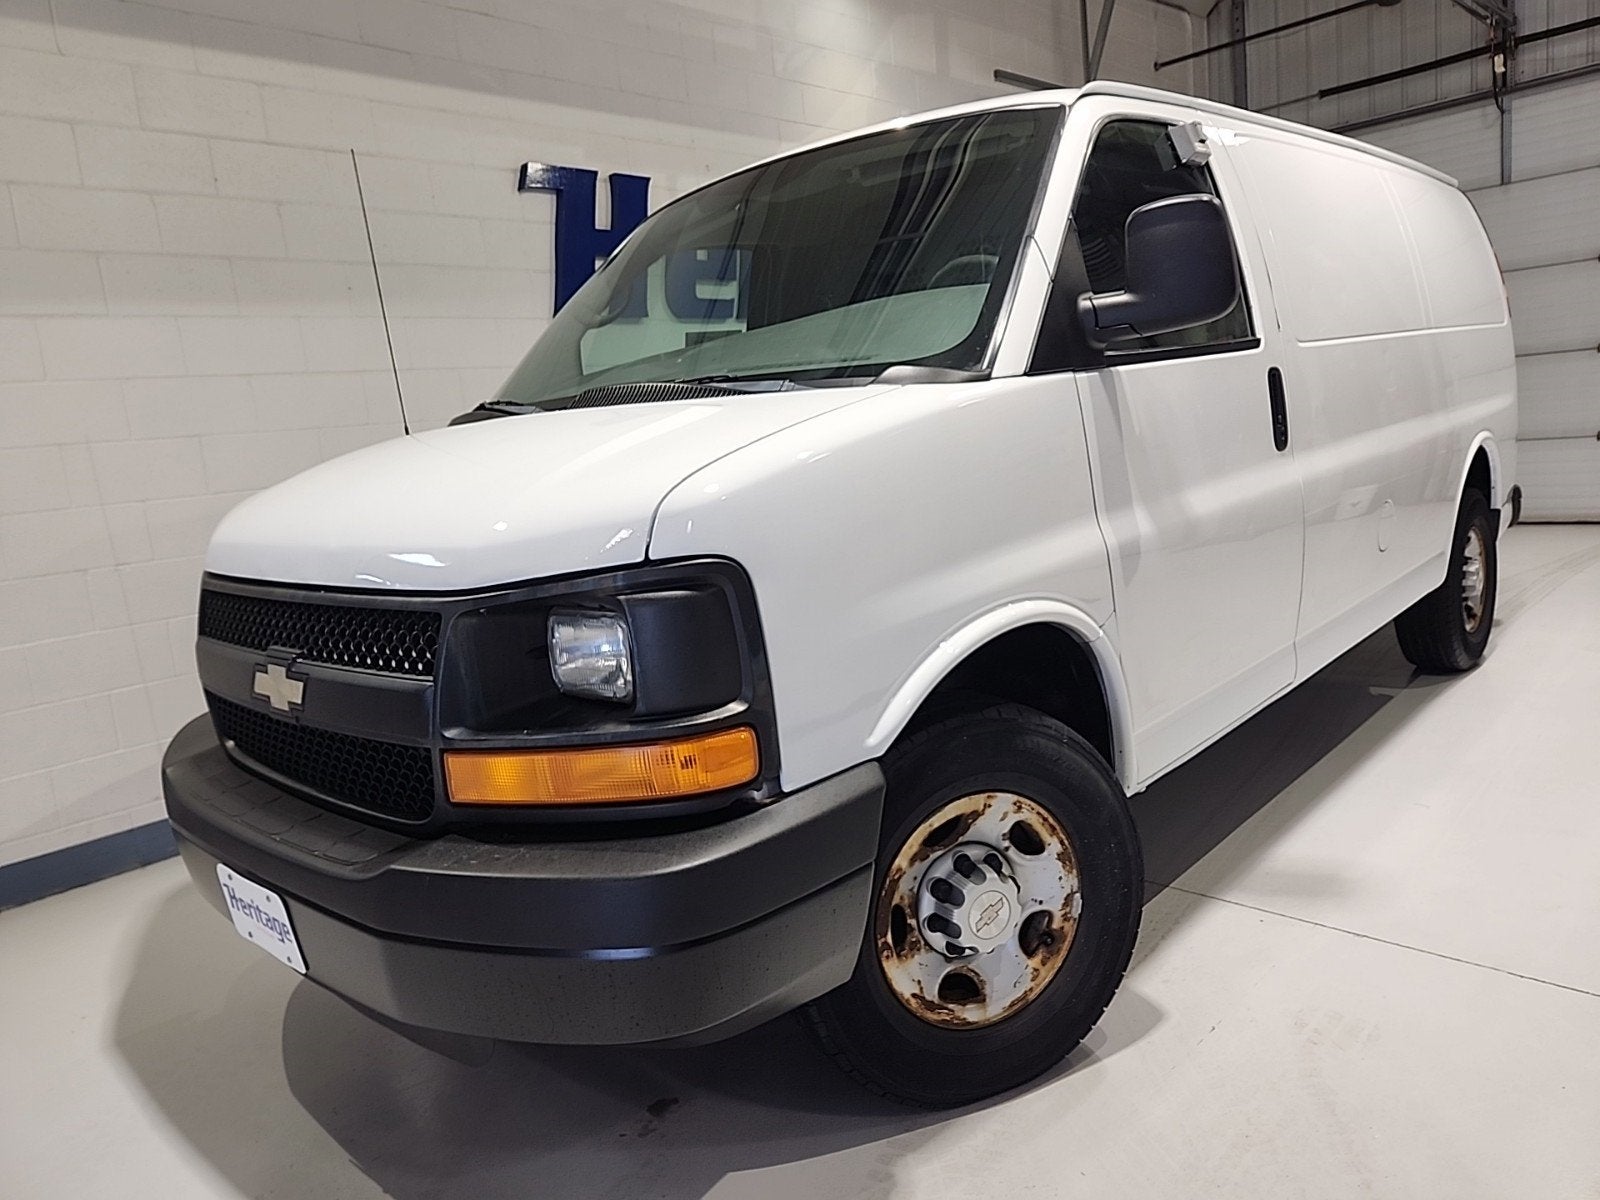 Used 2009 Chevrolet Express Cargo Work Van with VIN 1GCHG35K091132628 for sale in Tomahawk, WI